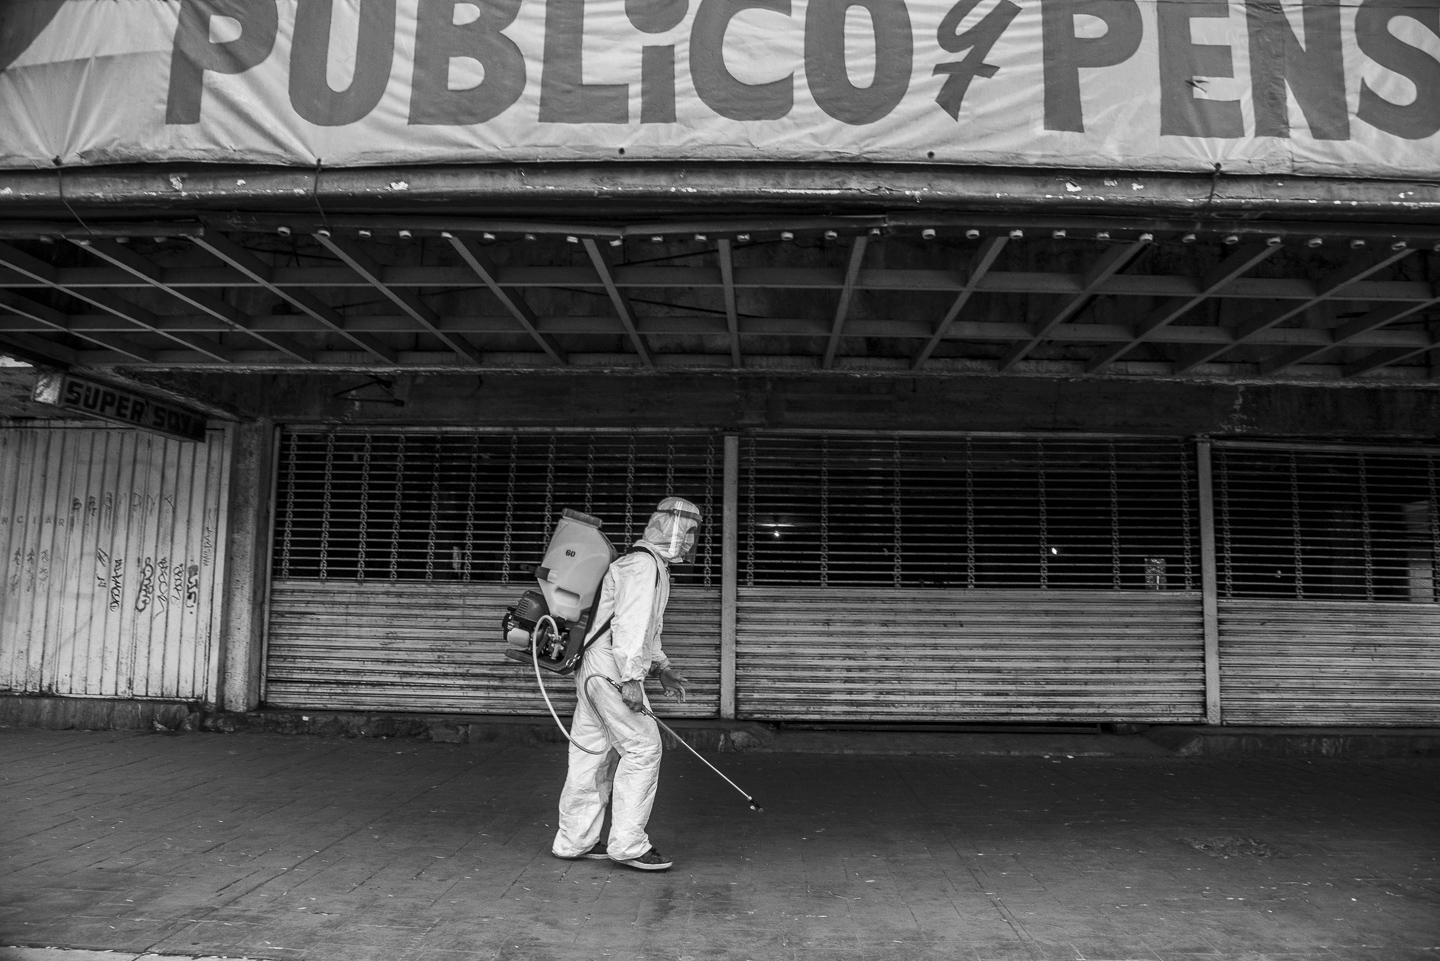 Letters from a distance - A Mexico City government worker walks the streets spraying with a disinfectant liquid what he...